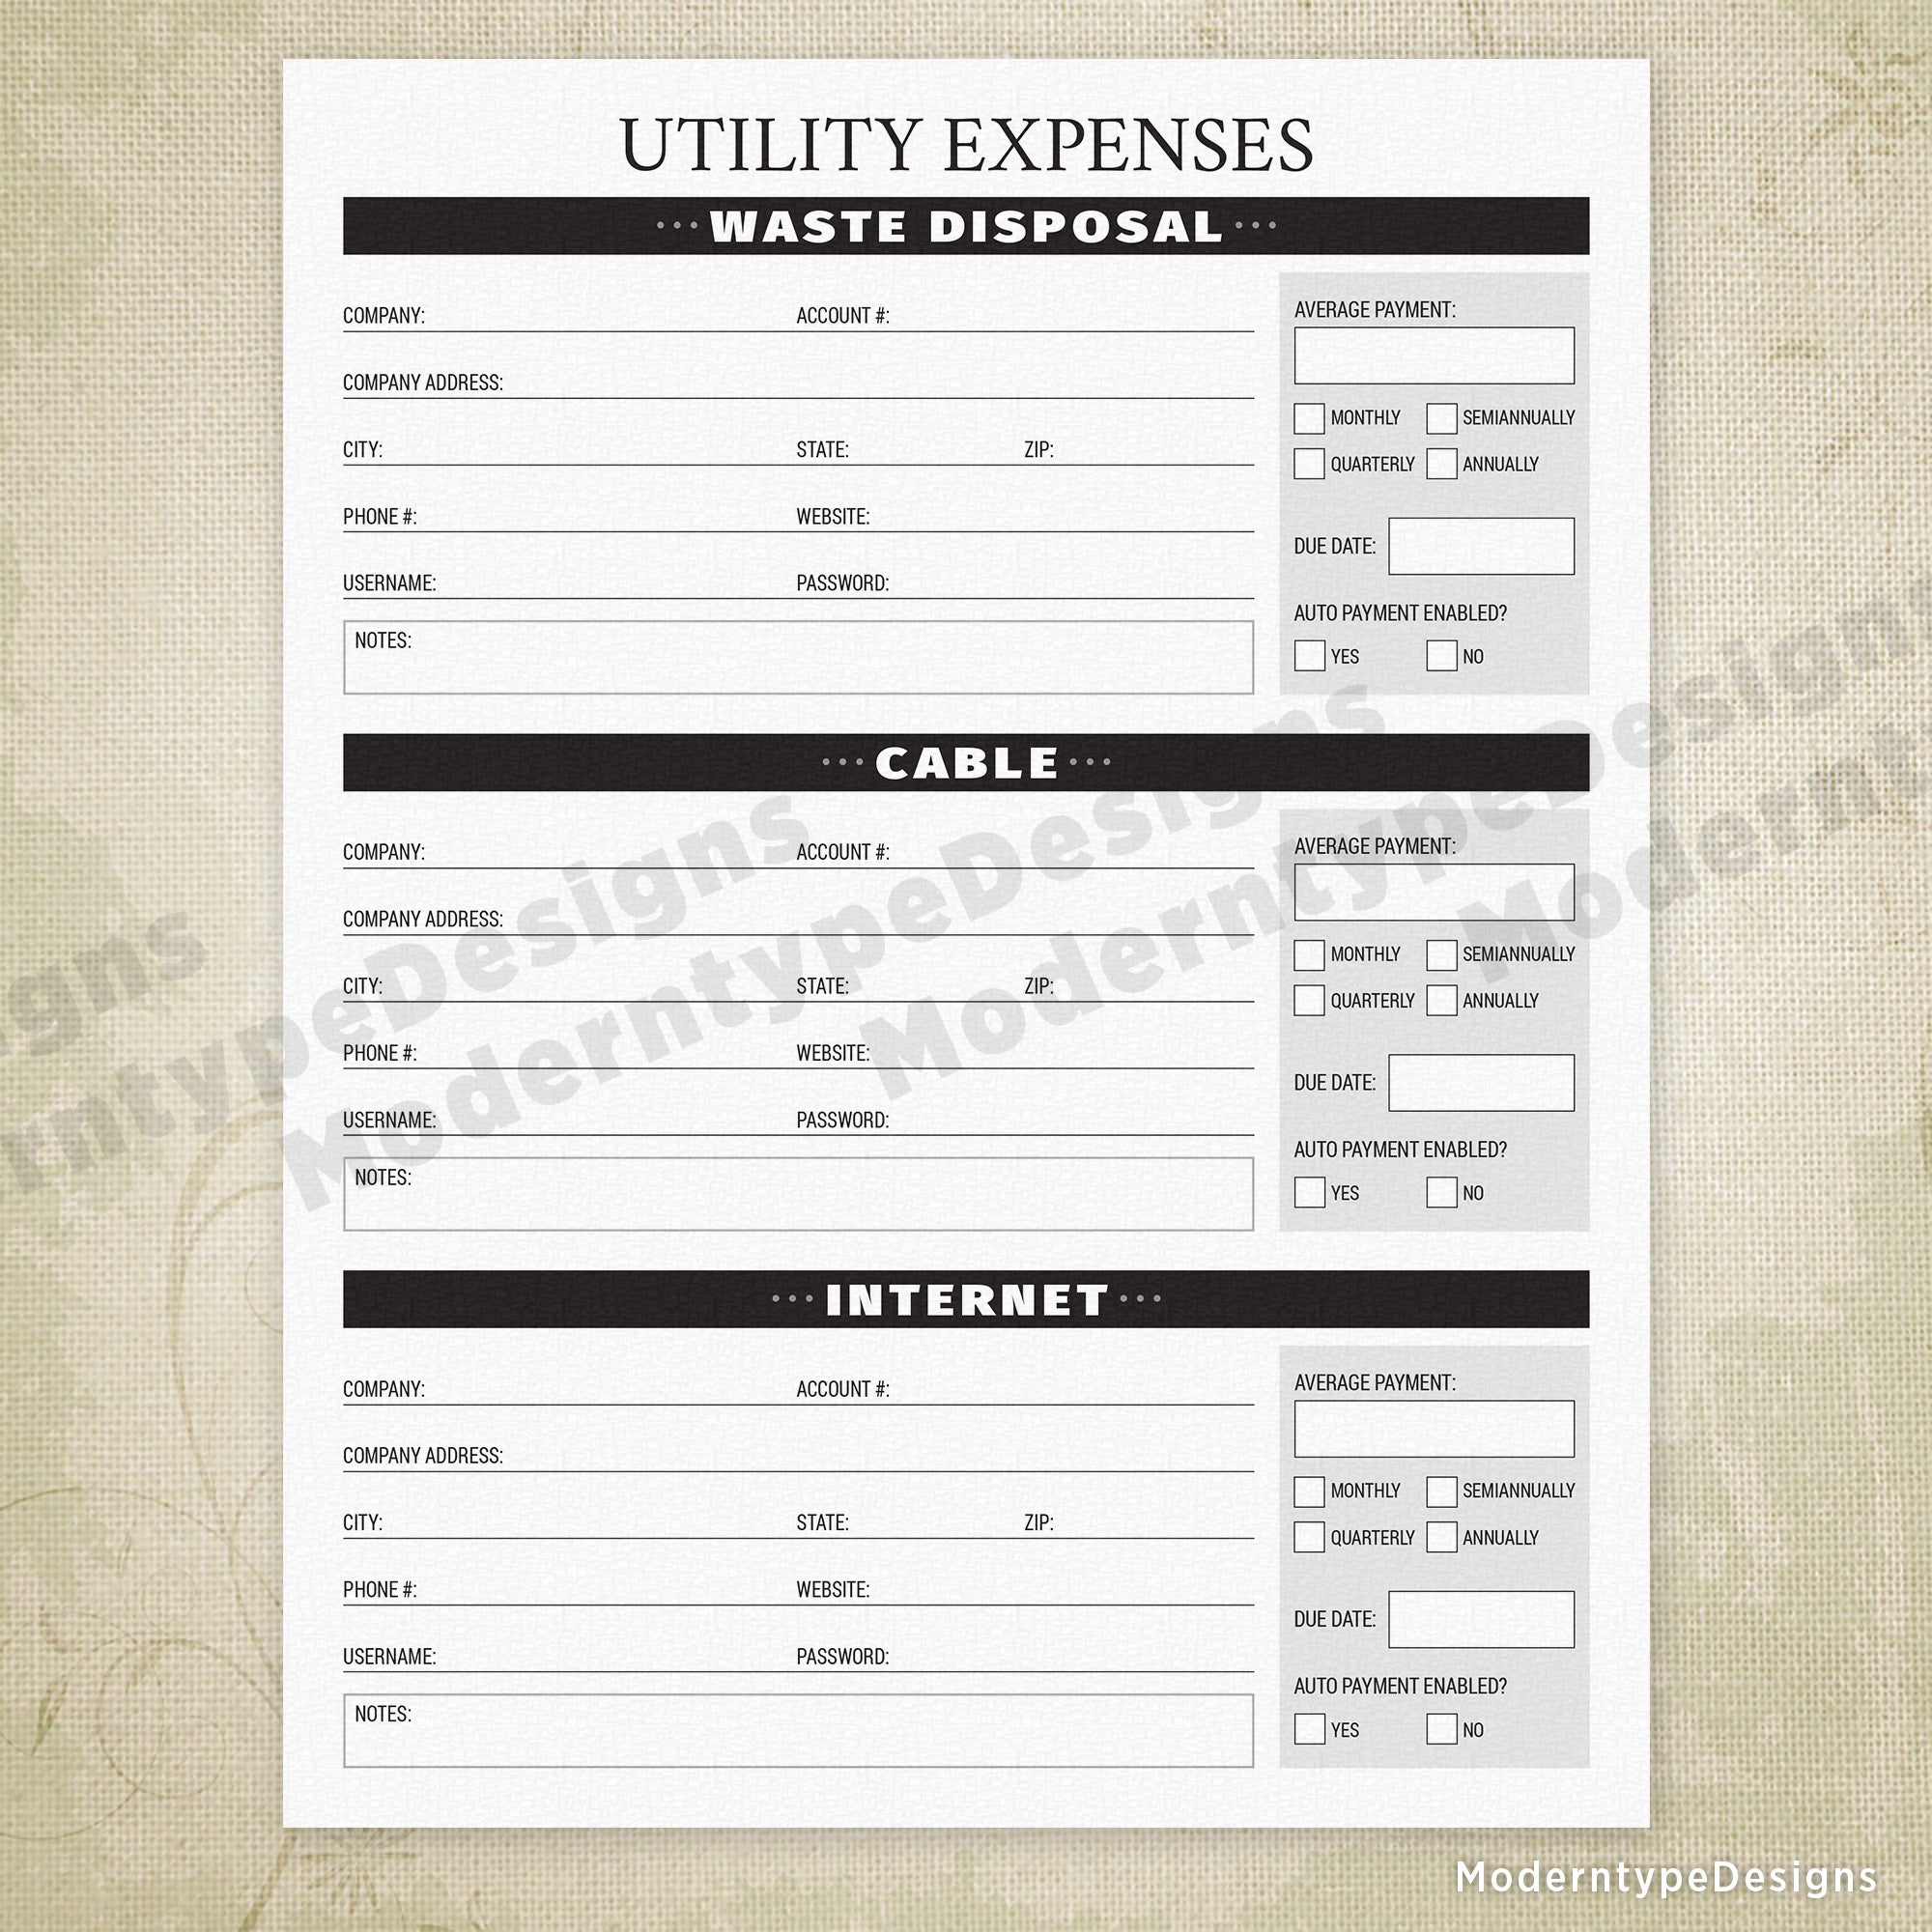 Utility Expenses Printable - End of Life